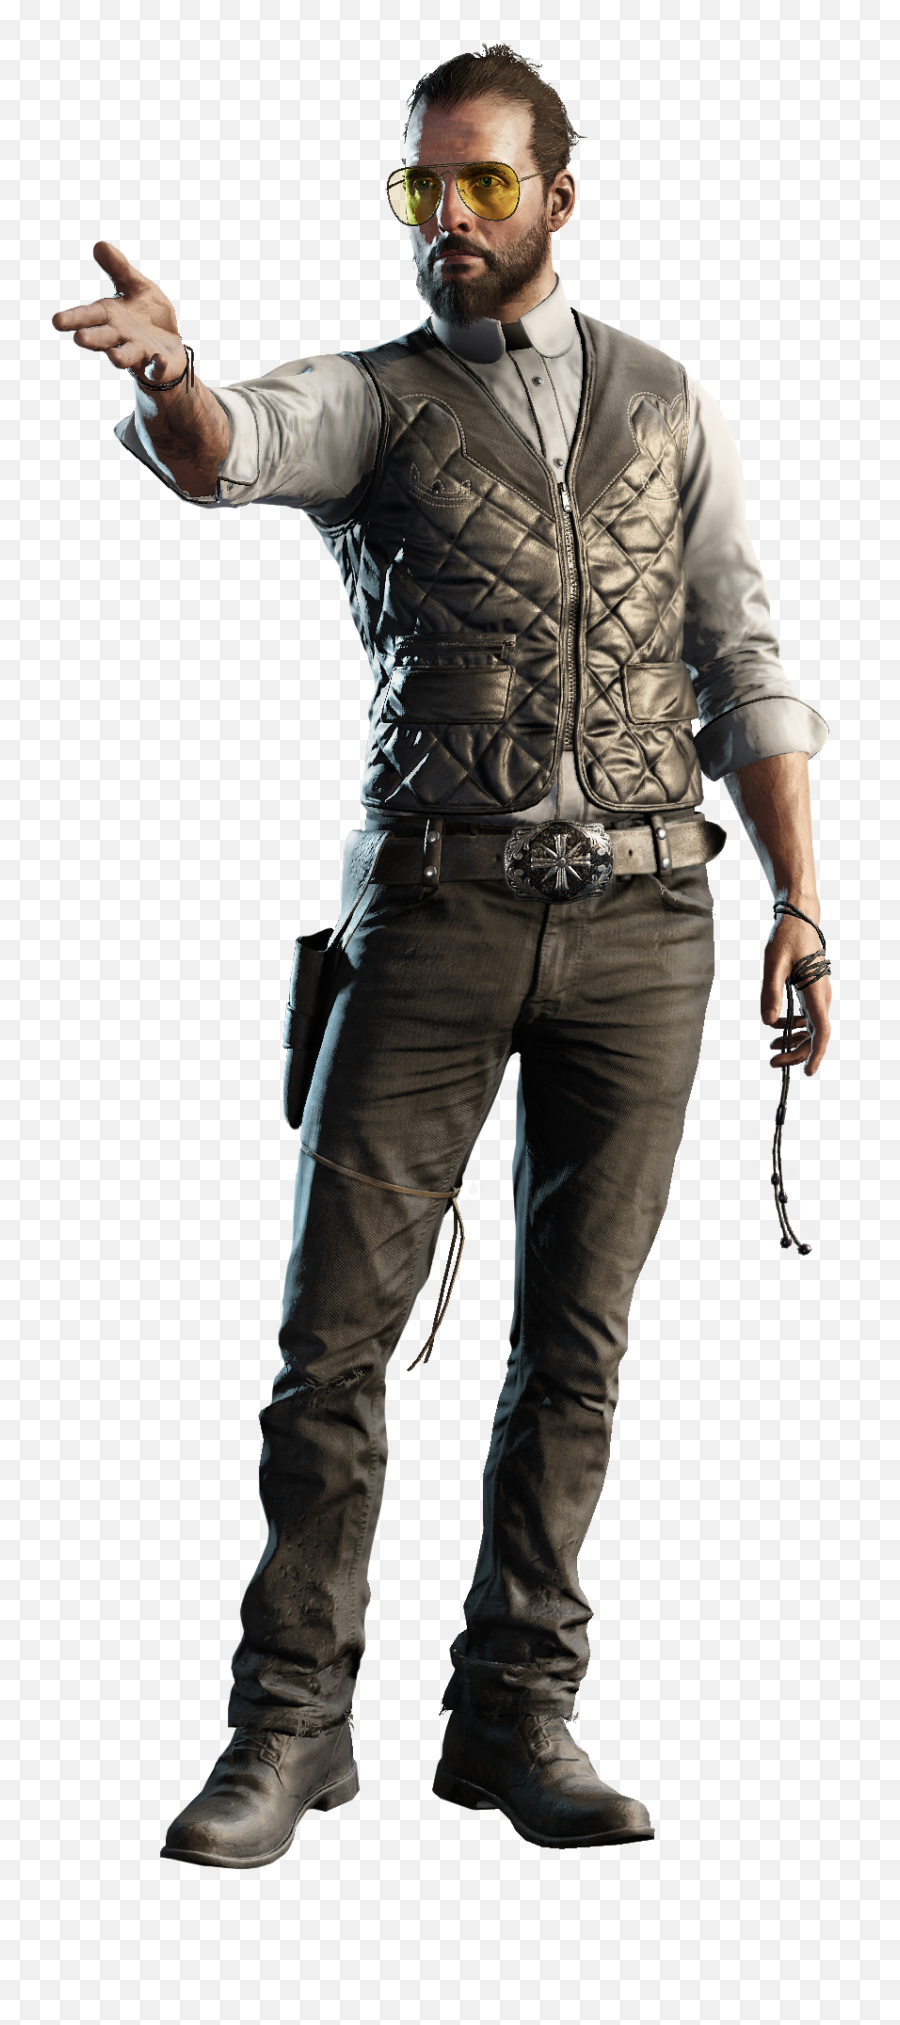 Far Cry 5 Joseph Seed Png Image With No - Far Cry 5 Joseph Seed Vest Emoji,Far Cry 5 Png